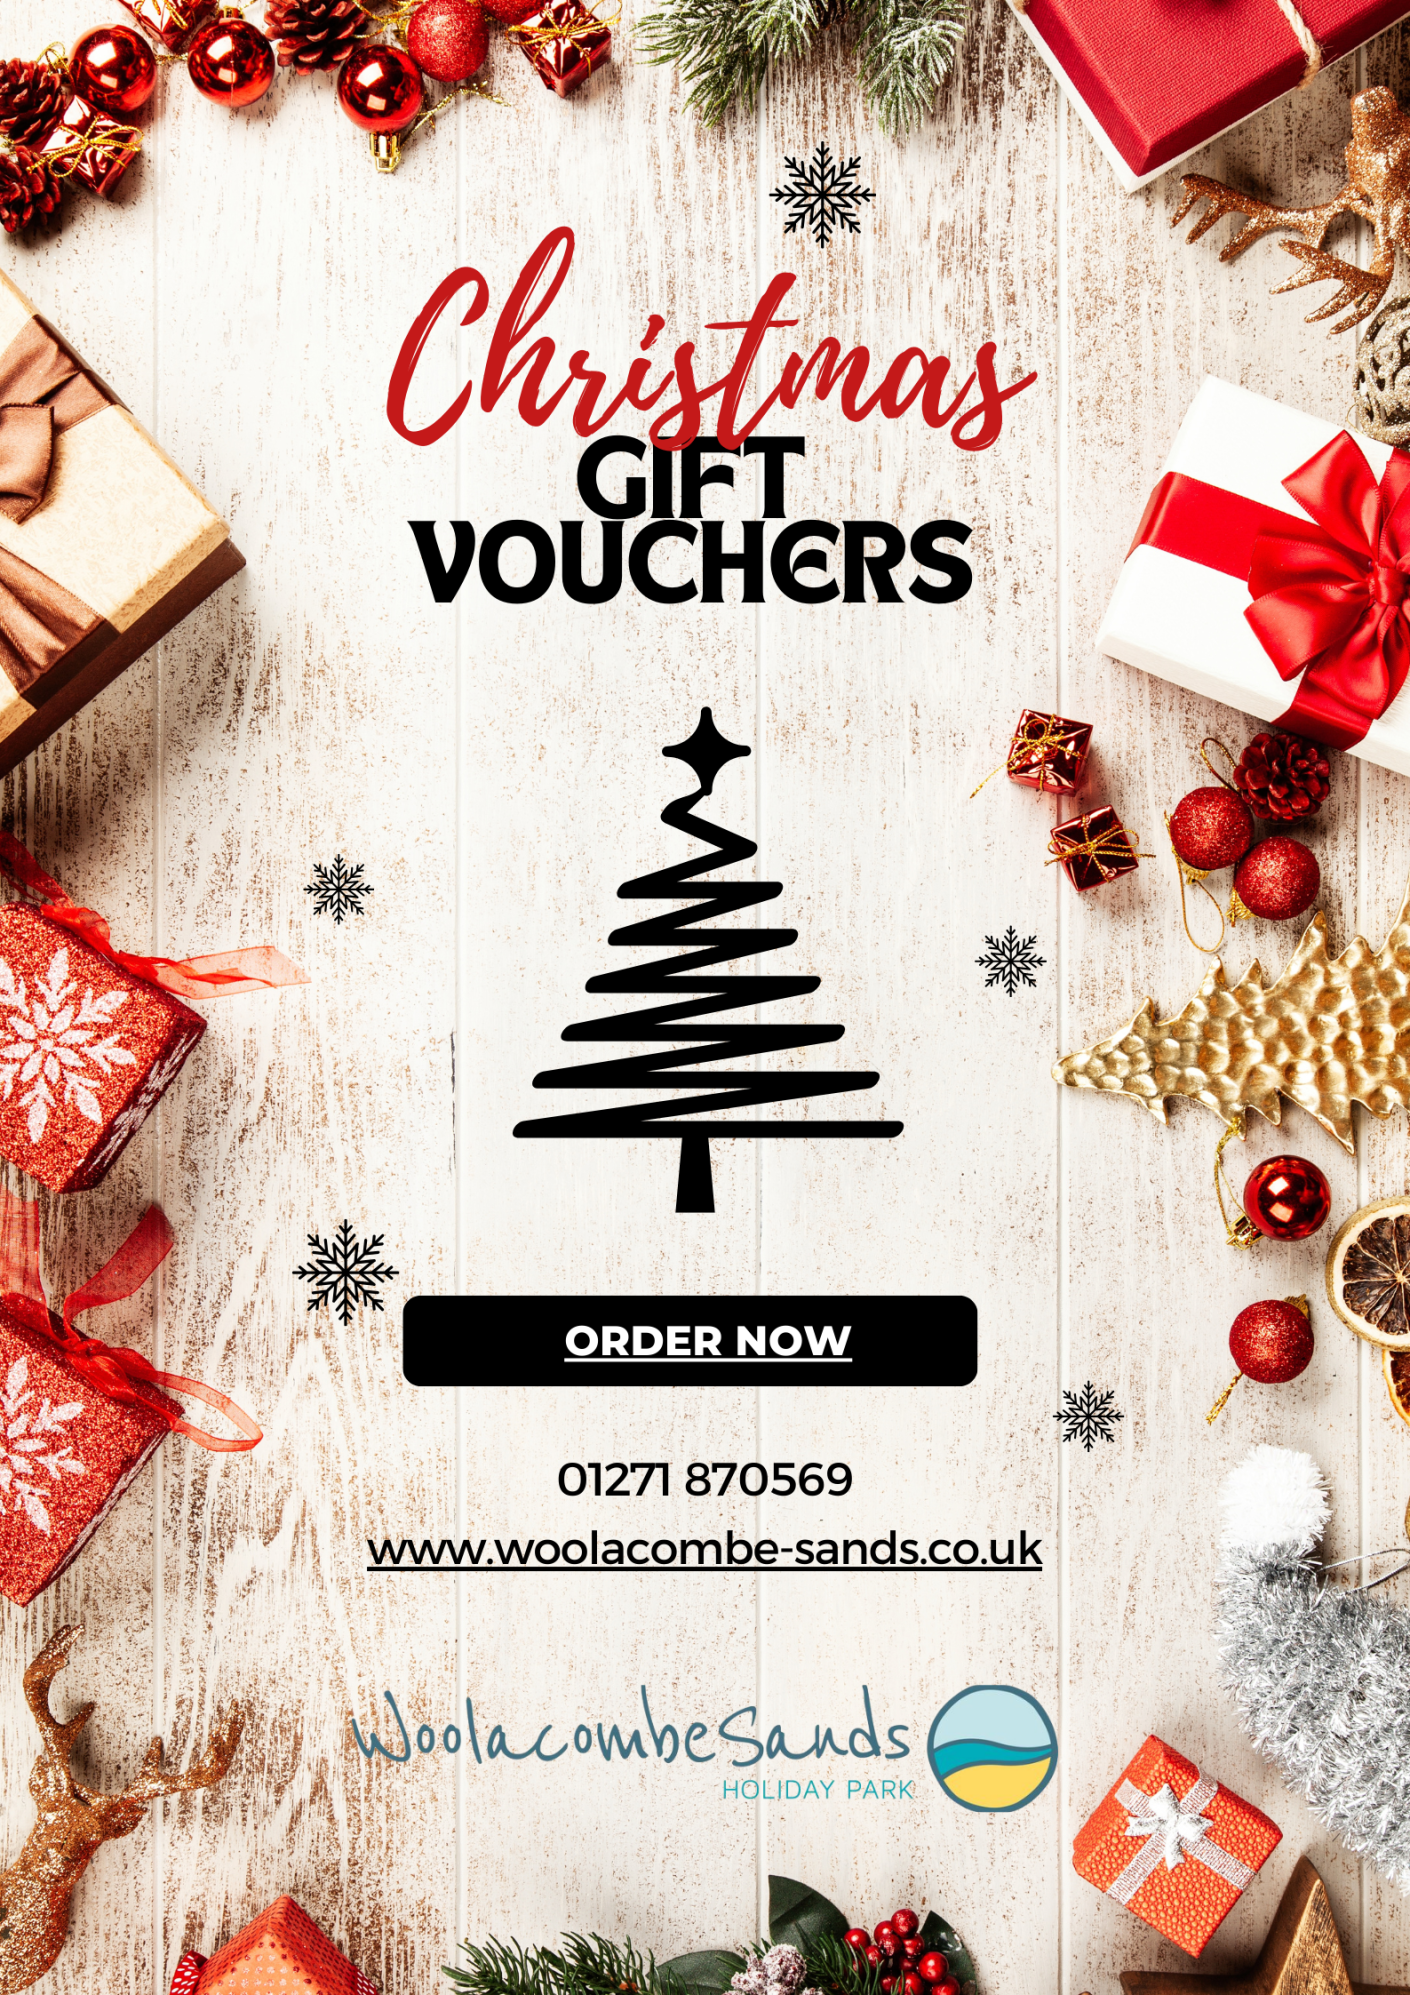 Christmas Gift Vouchers | Woolacombe Sands